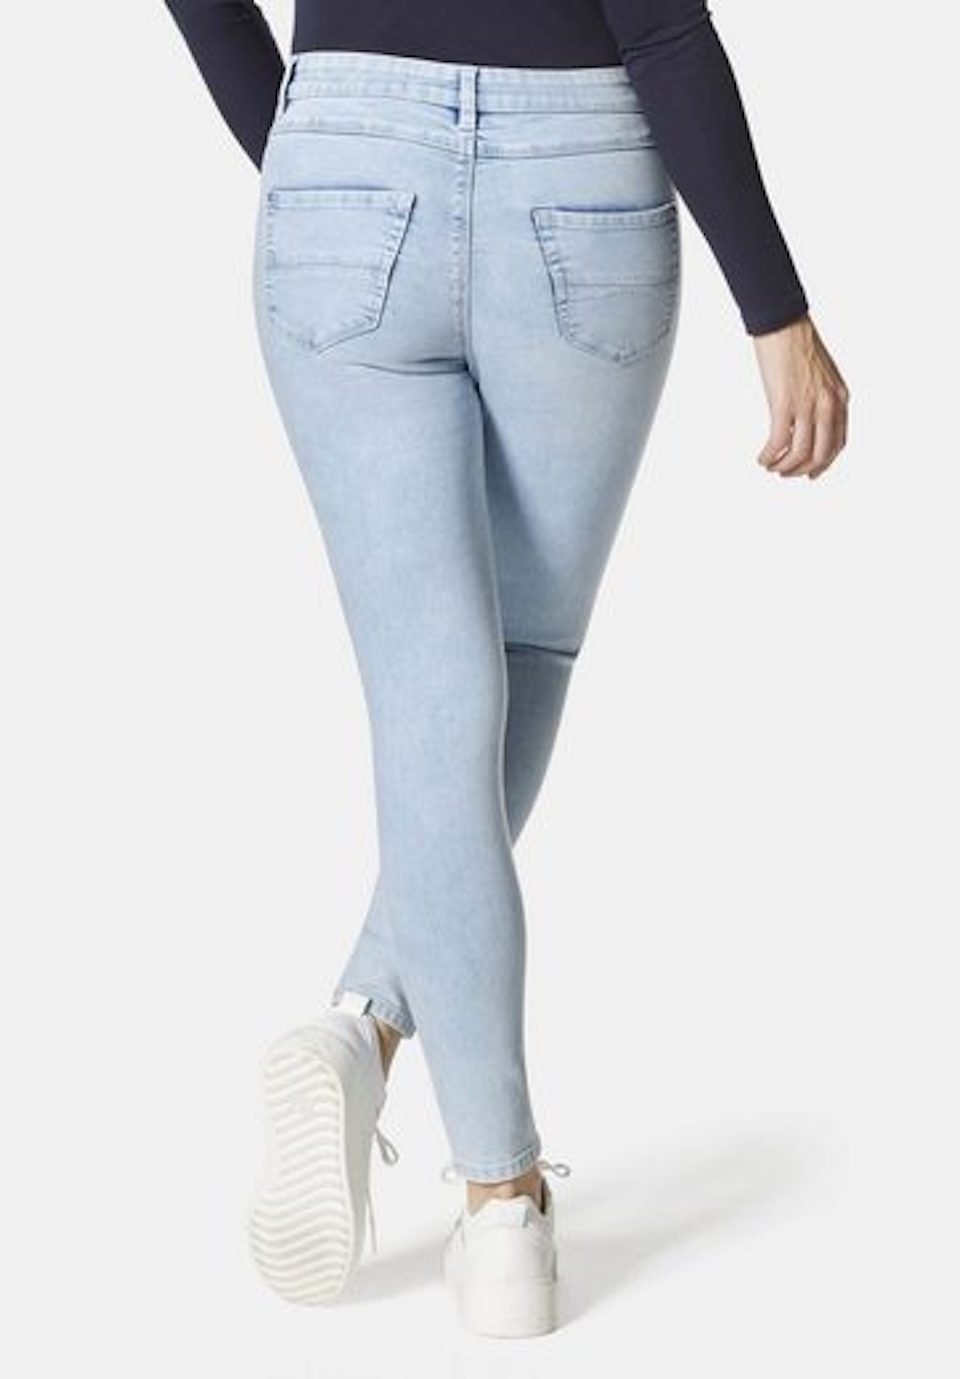 - JEANS SKINNY RIO Skinny-fit-Jeans WOMEN STRETCH STOOKER FIT - MOVE STRASS FEXXI Blue bleached